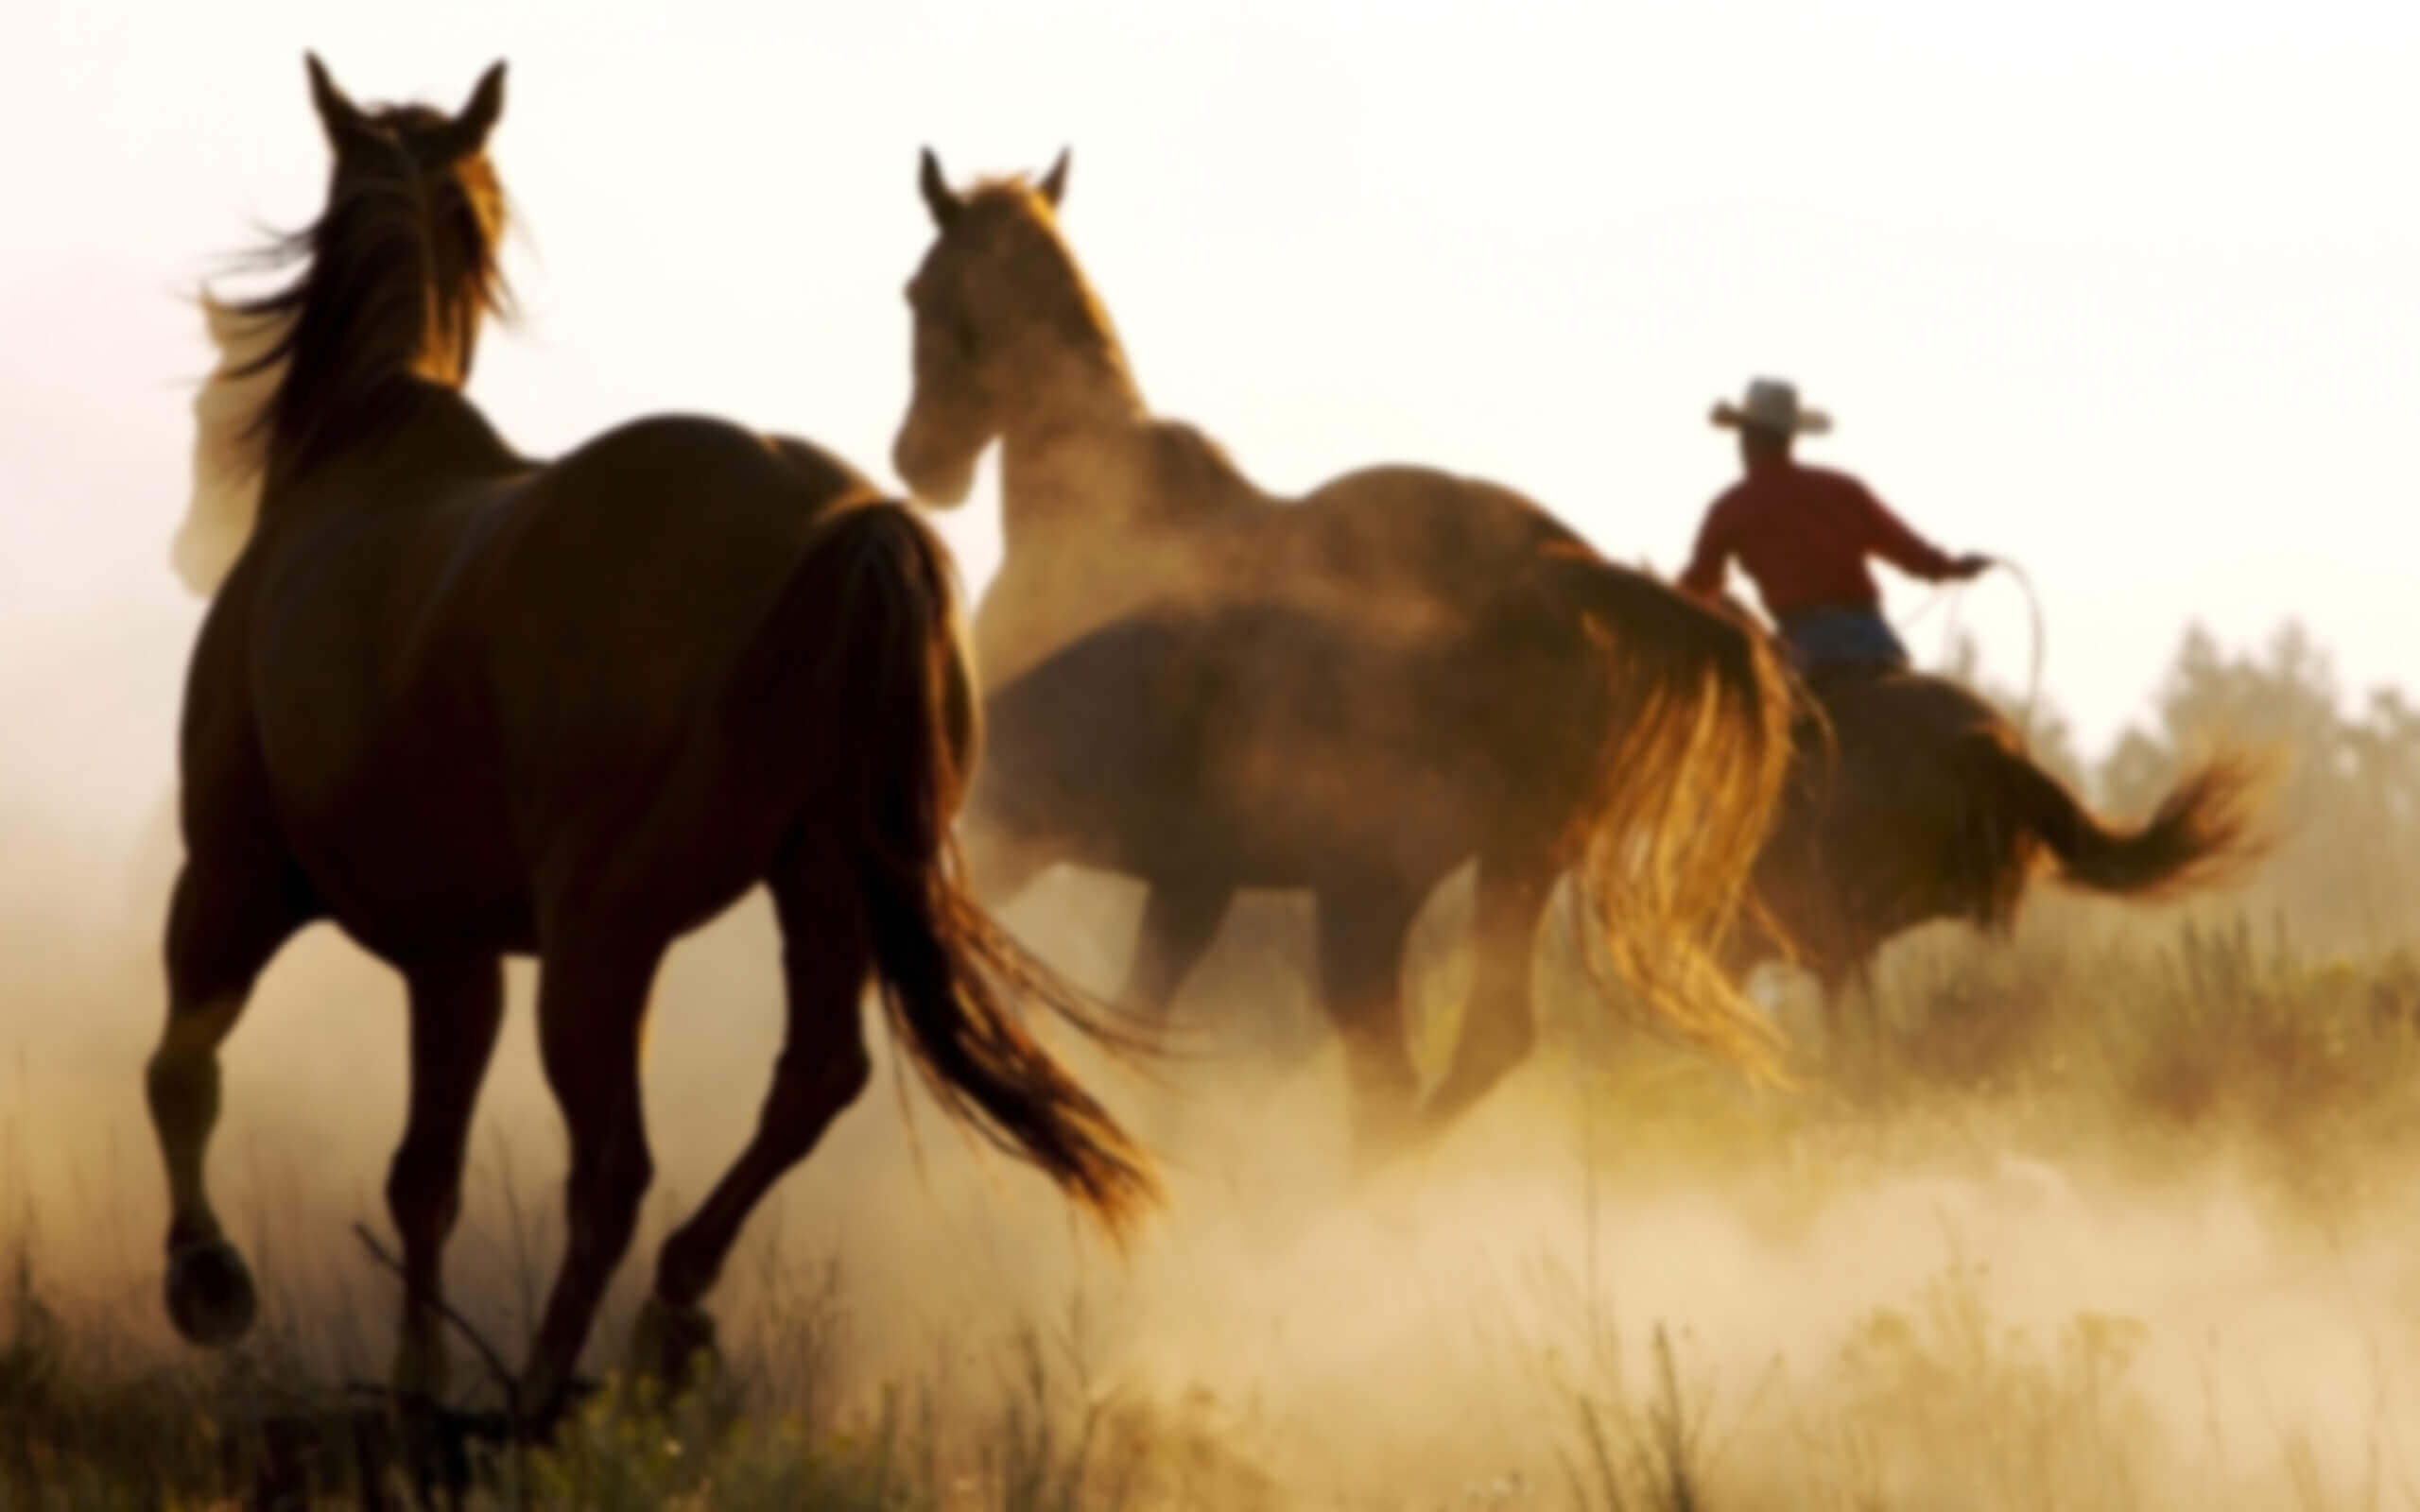 ws_Wild_Horses_and_Cowboy_2560x1600 (1) (1)